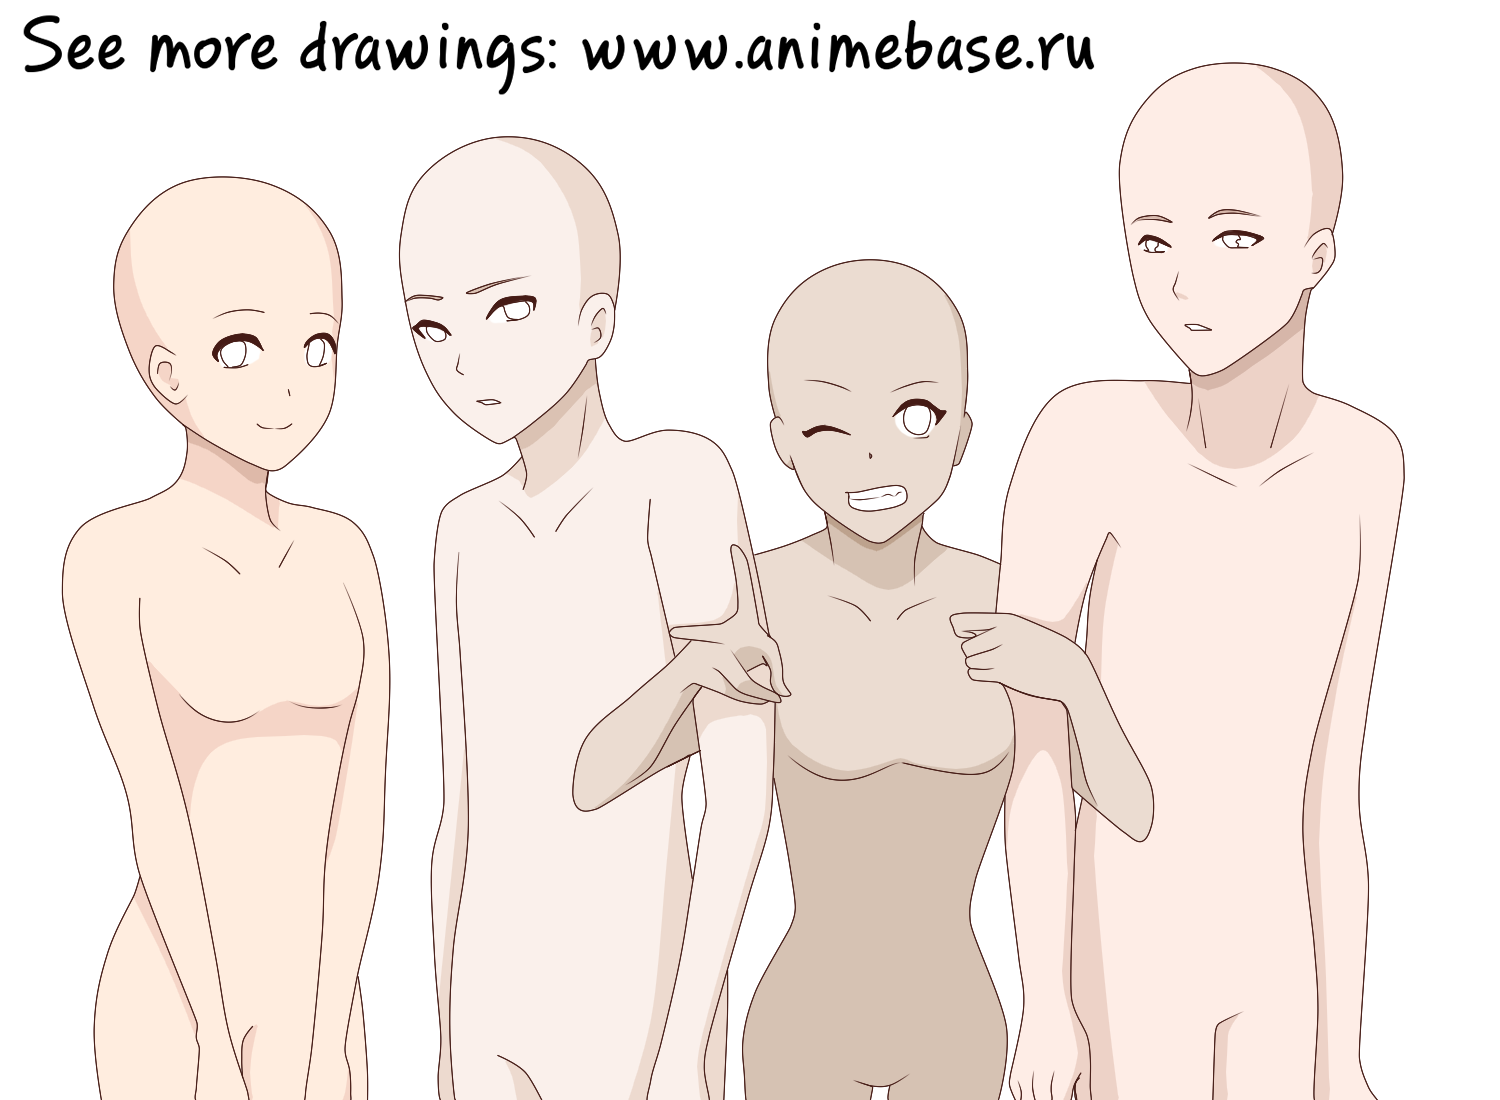 Group base | Anime poses reference, Drawing poses, Drawing reference poses